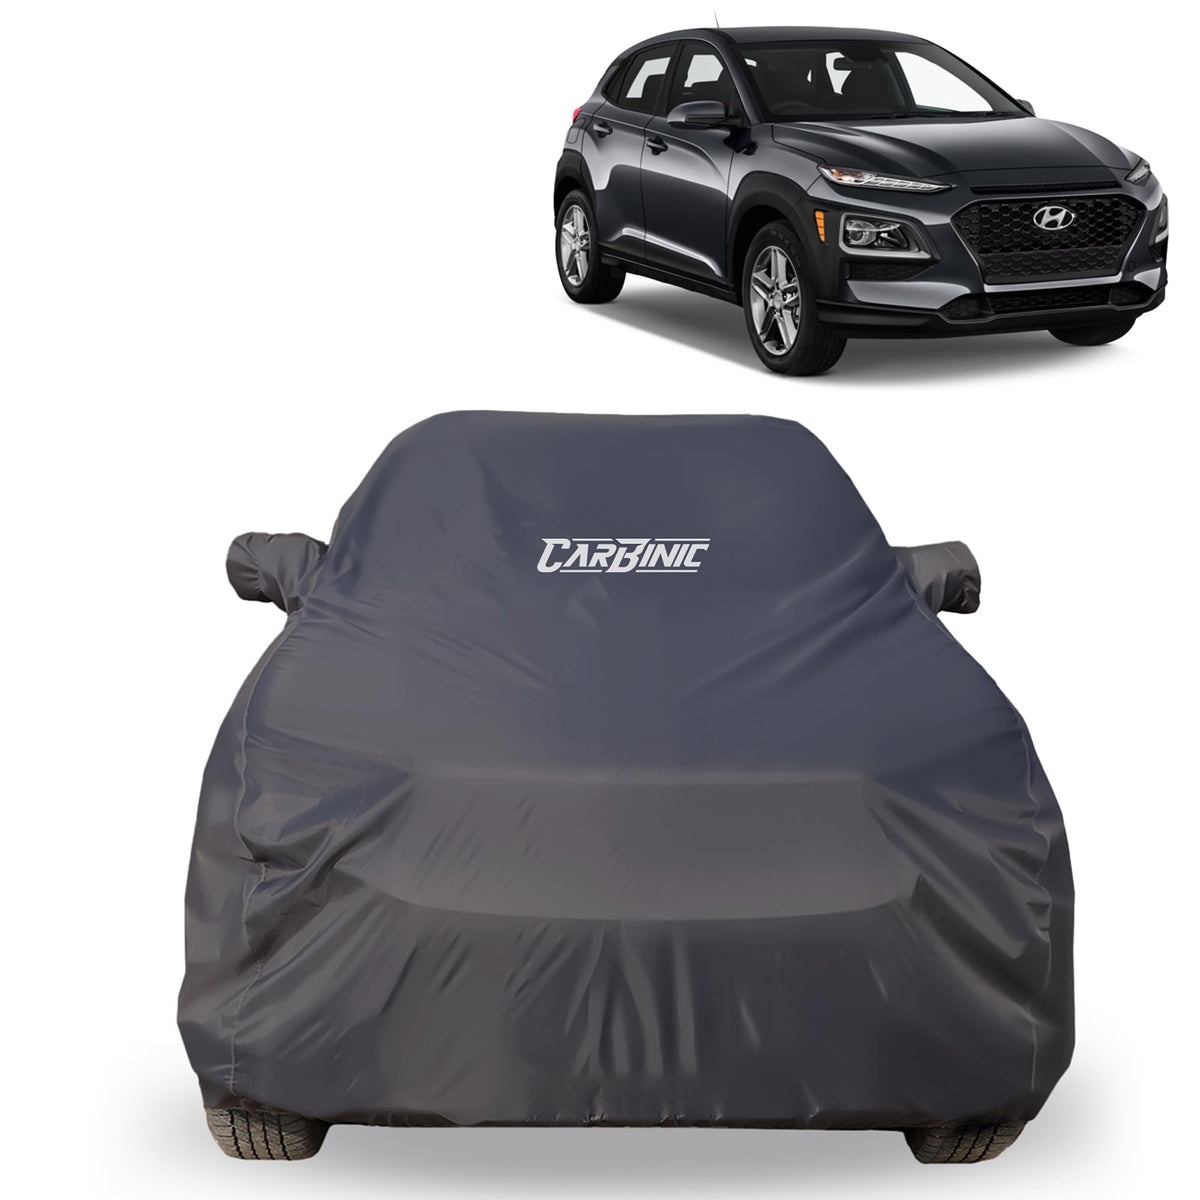 CARBINIC Car Body Cover for Maruti Suzuki Fronx 2023 | Water Resistant, UV Protection Car Cover | Scratchproof Body Shield | All-Weather Cover | Mirror Pocket & Antenna | Car Accessories Dusk Grey